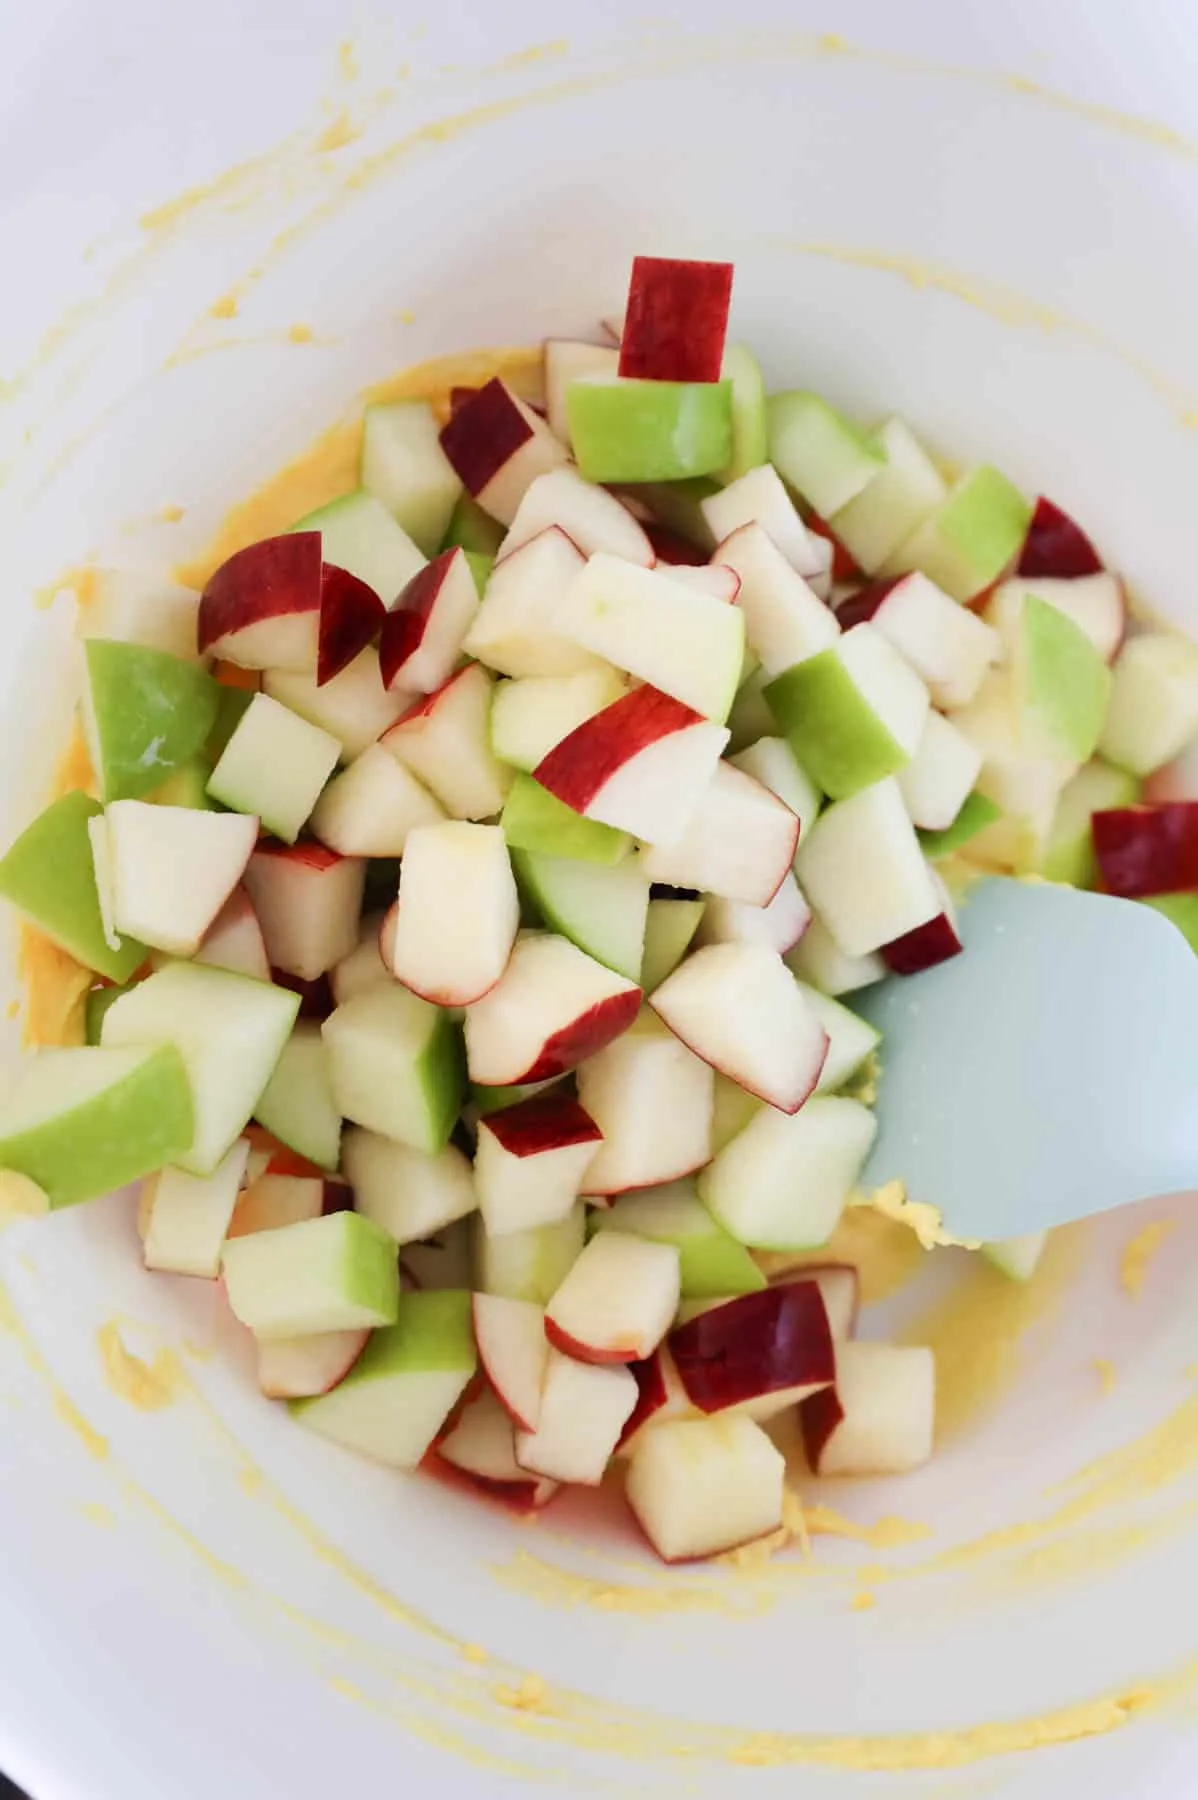 diced red and green apples added to a bowl with vanilla instant pudding